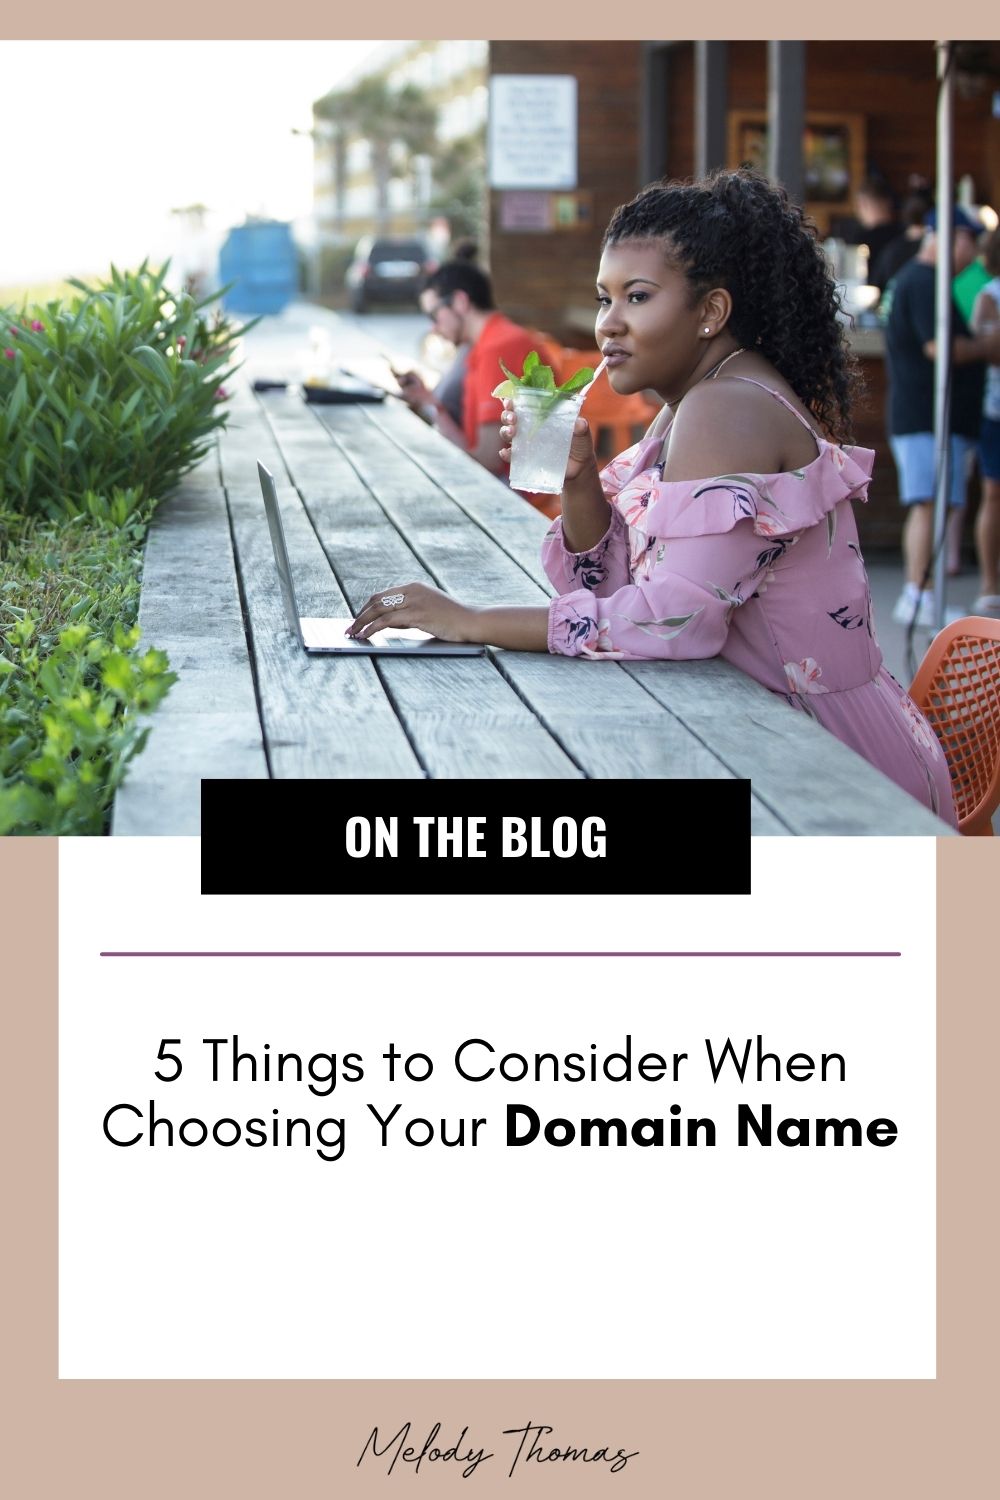 5 Things to Consider When Choosing Your Domain Name